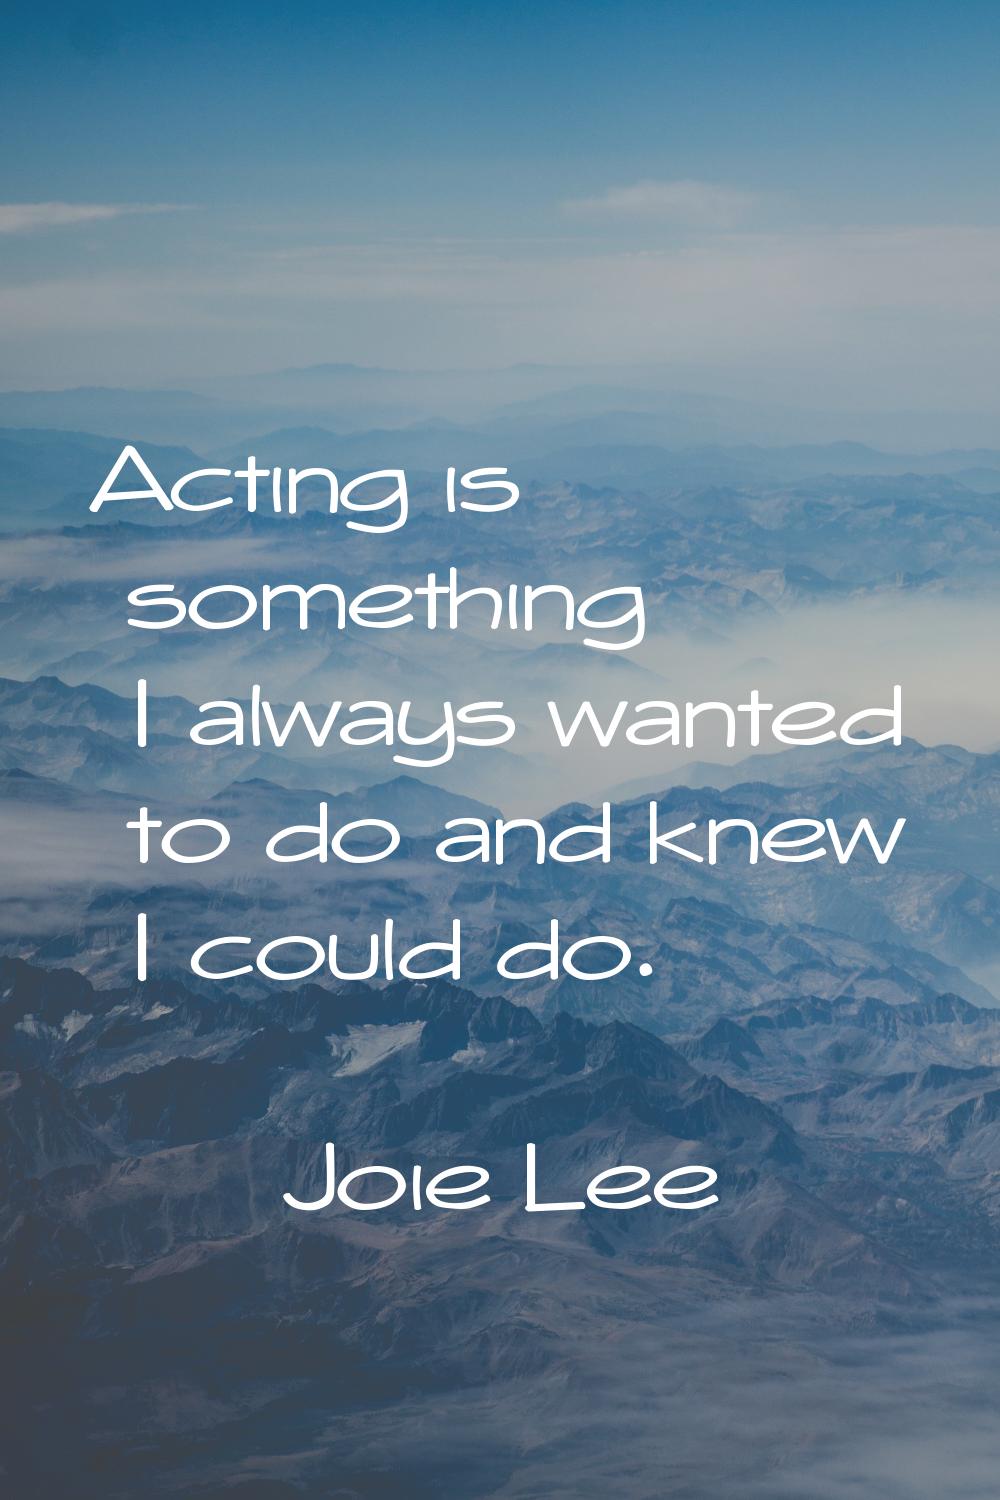 Acting is something I always wanted to do and knew I could do.